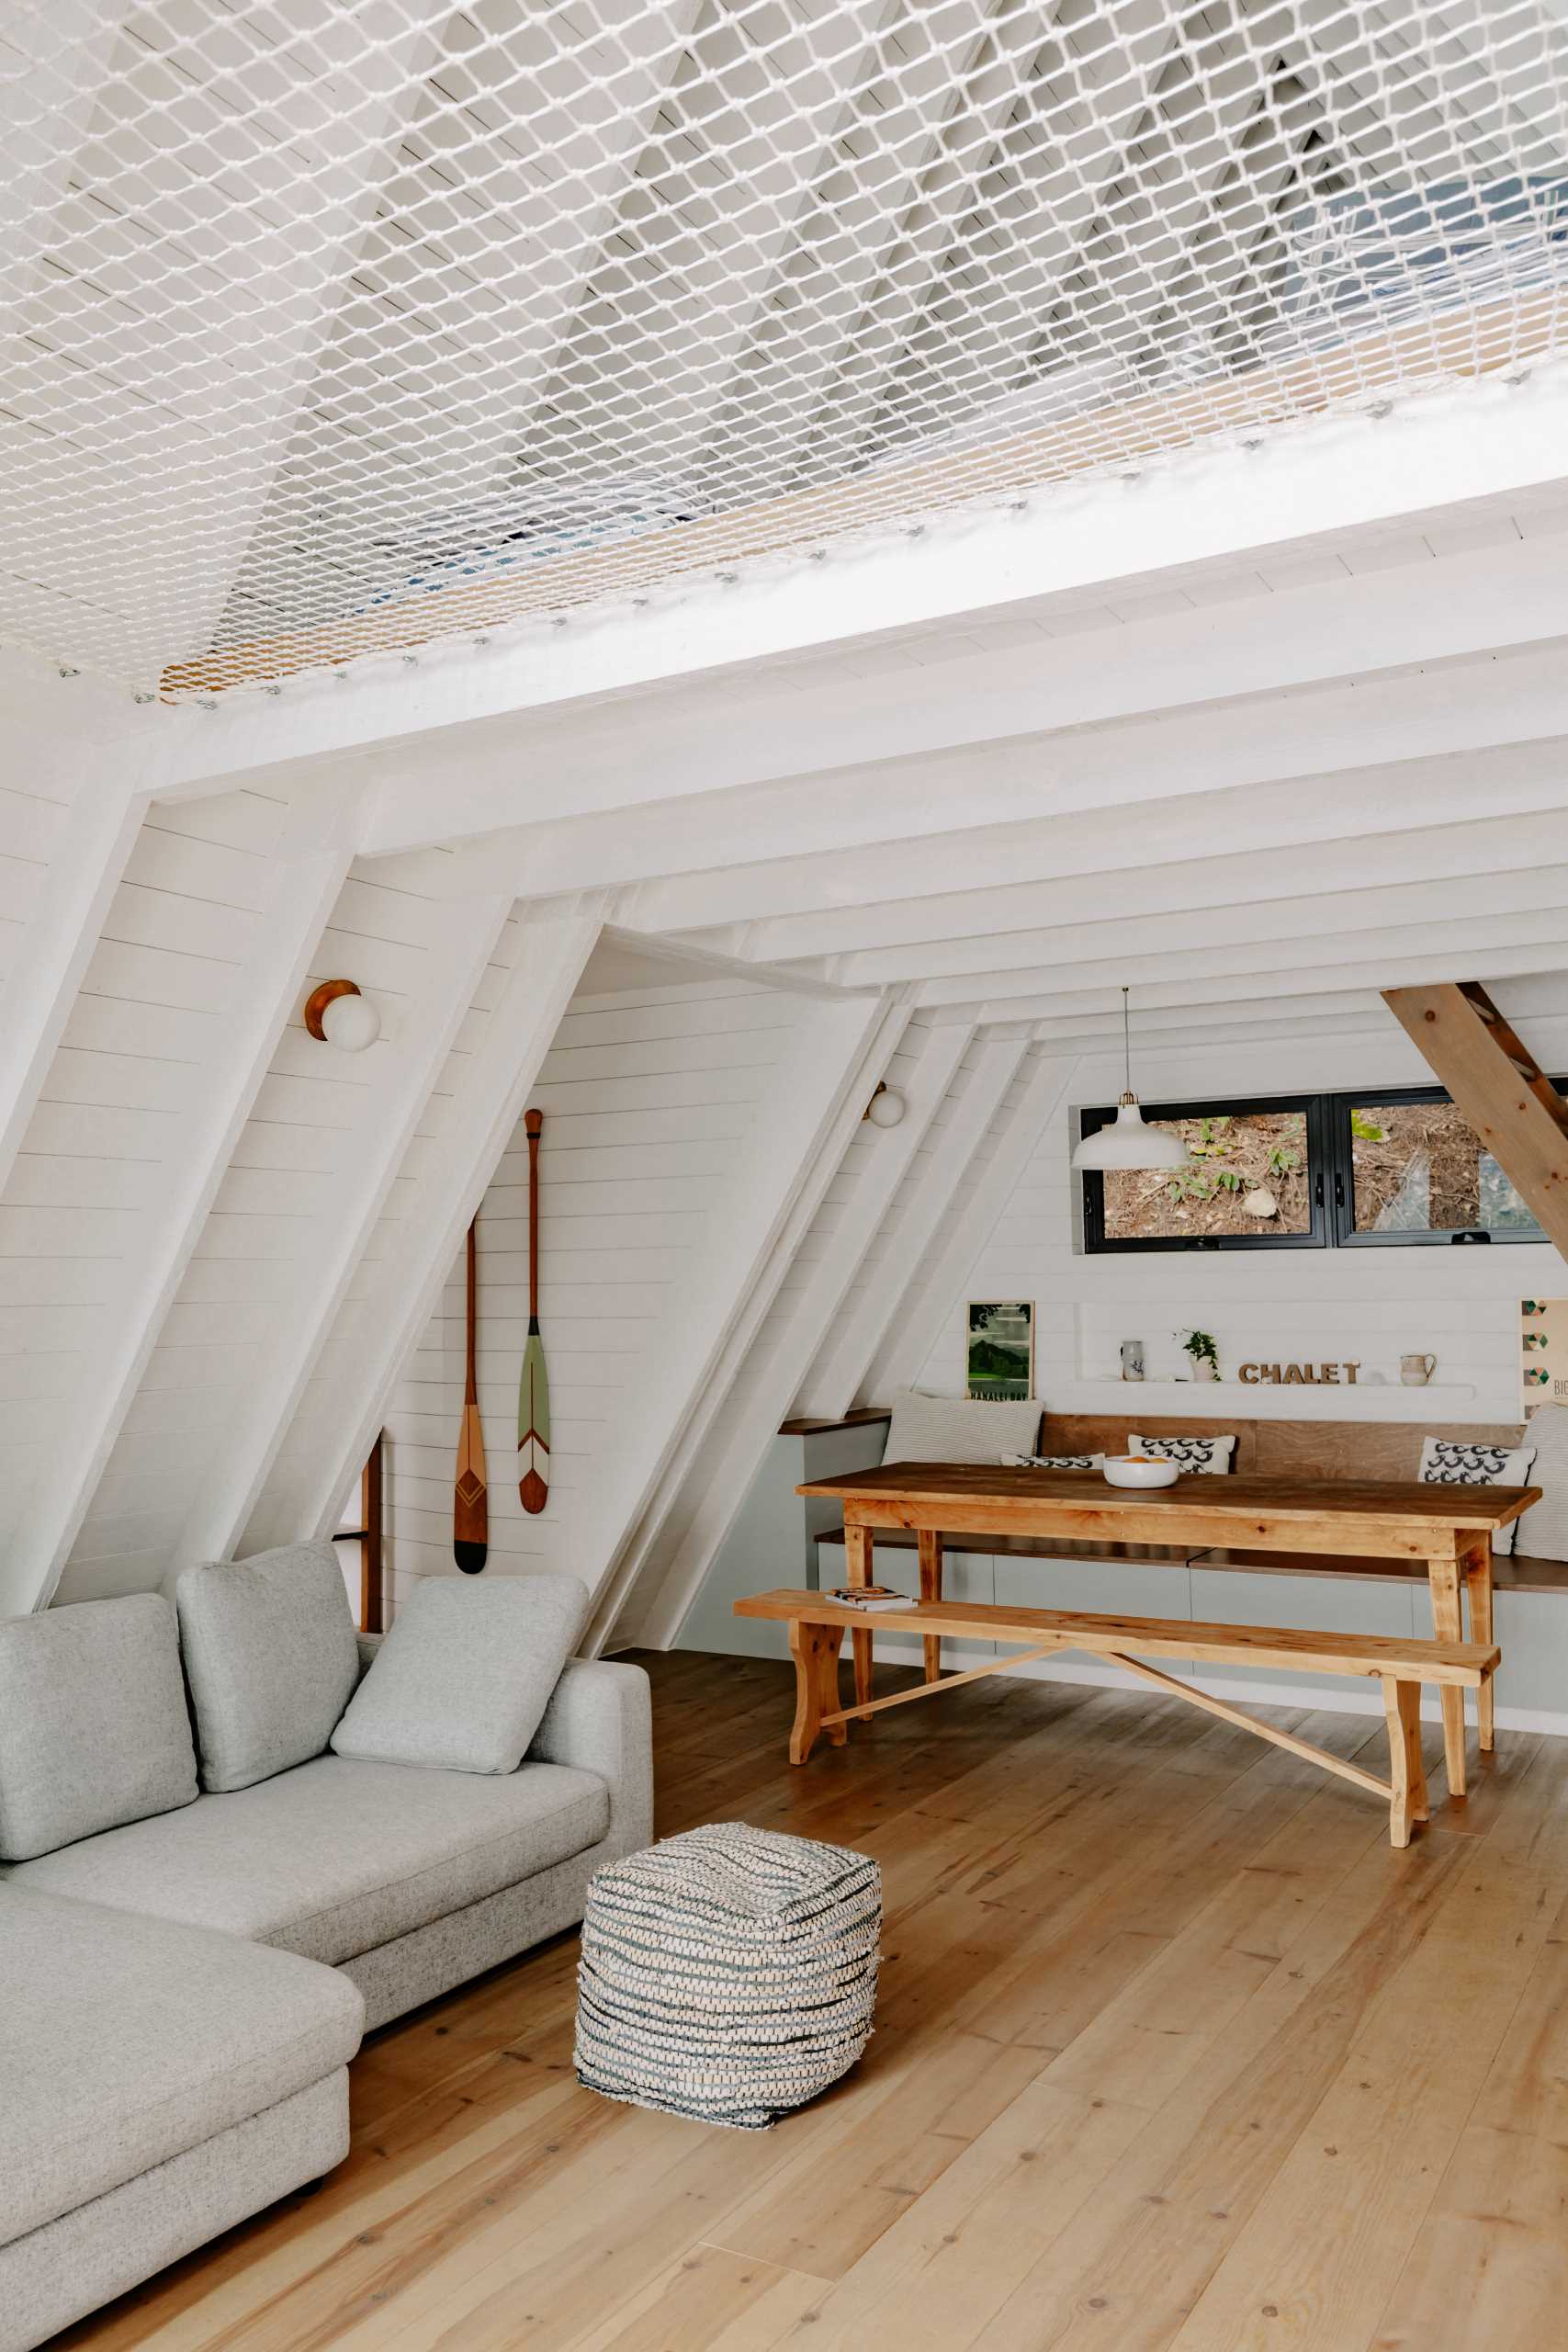 A updated A-Frame cabin with a white interior, wood floors, and banquette seating in the dining area.